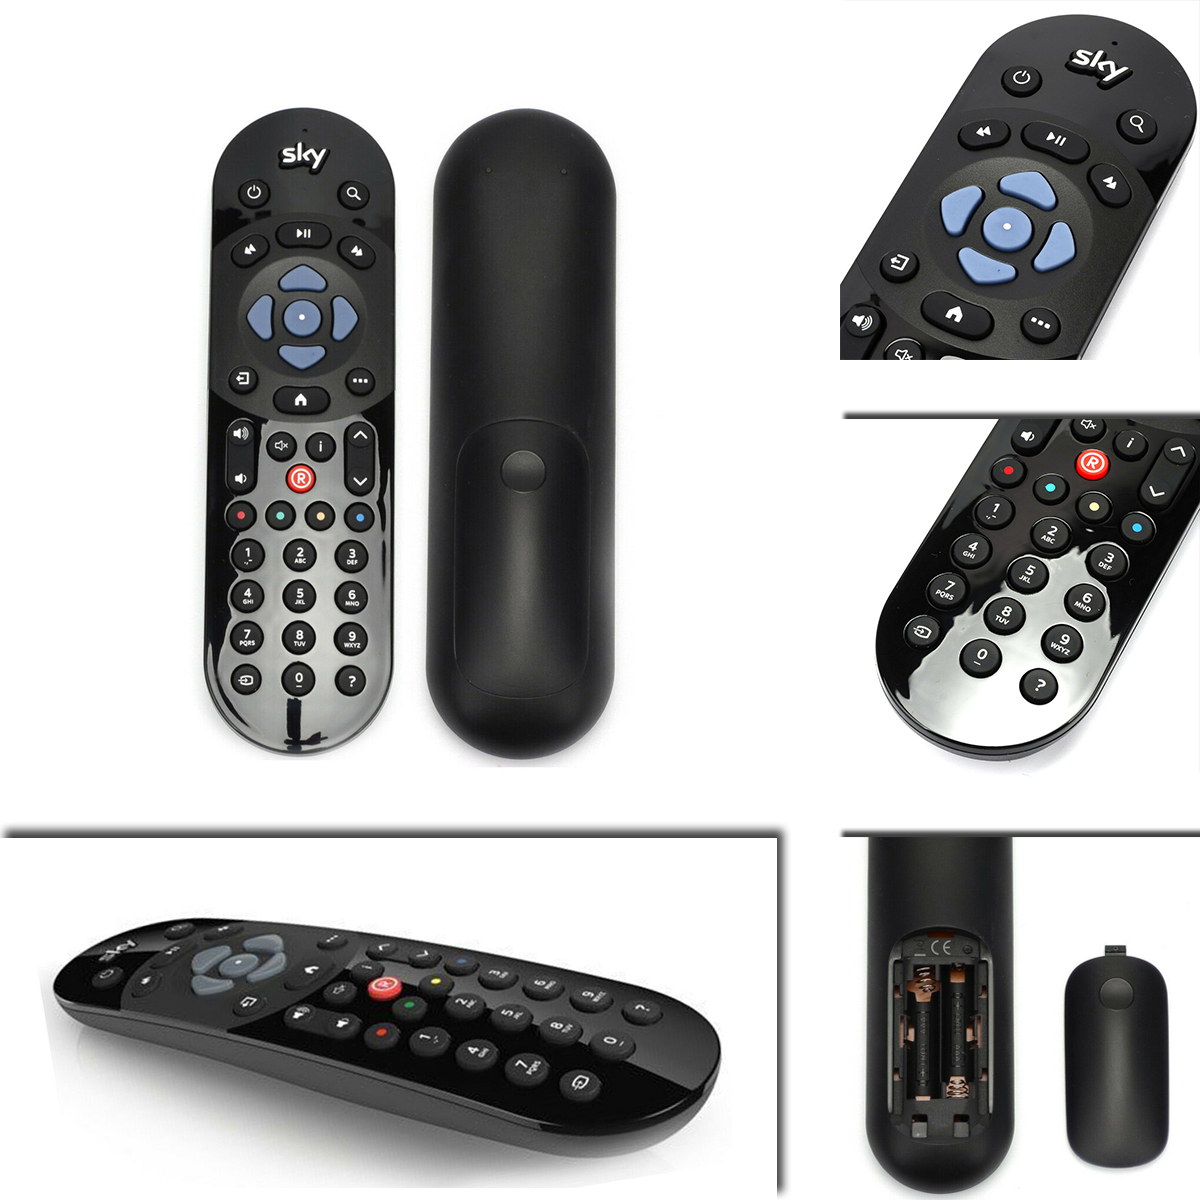 E57065-Universal-Replacement-Infrared-Remote-Control-For-Sky-Q-Version-2-TV-Box-1671331-4